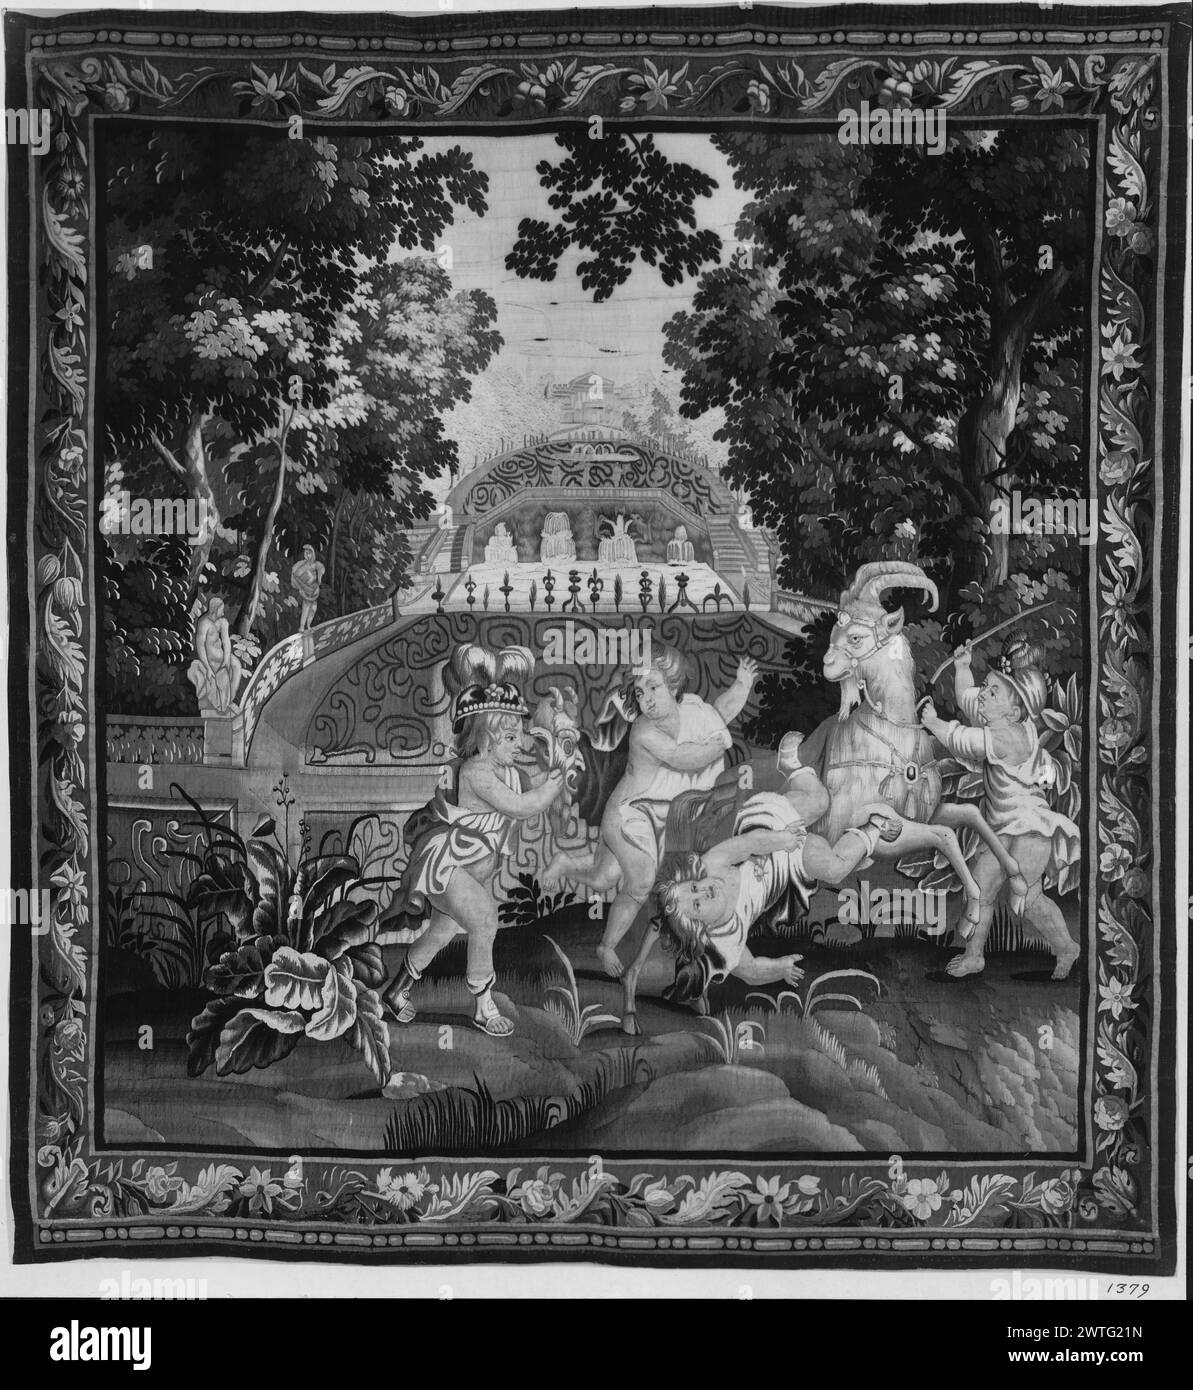 Bacchanalian children. unknown c. 1690 Tapestry Materials/Techniques: unknown Culture: English Weaving Center: unknown Ownership History: French & Co. 4 boys playing with goat, 1 tumbles off (foreground), one wears Indian-style headdress & holds mask, stylized garden with fountains & architectural scene (background) (BRD) garland of acanthus leaves & flowers with bead-&-reel molding Marillier discusses a set of 7 panels at Cotehele; this tapestry matches the description (see pl. 10b). He also identifies 2 other copies: one belonged to Mrs. Fetherston-Godly, the other to Colonel John Harvey of Stock Photo